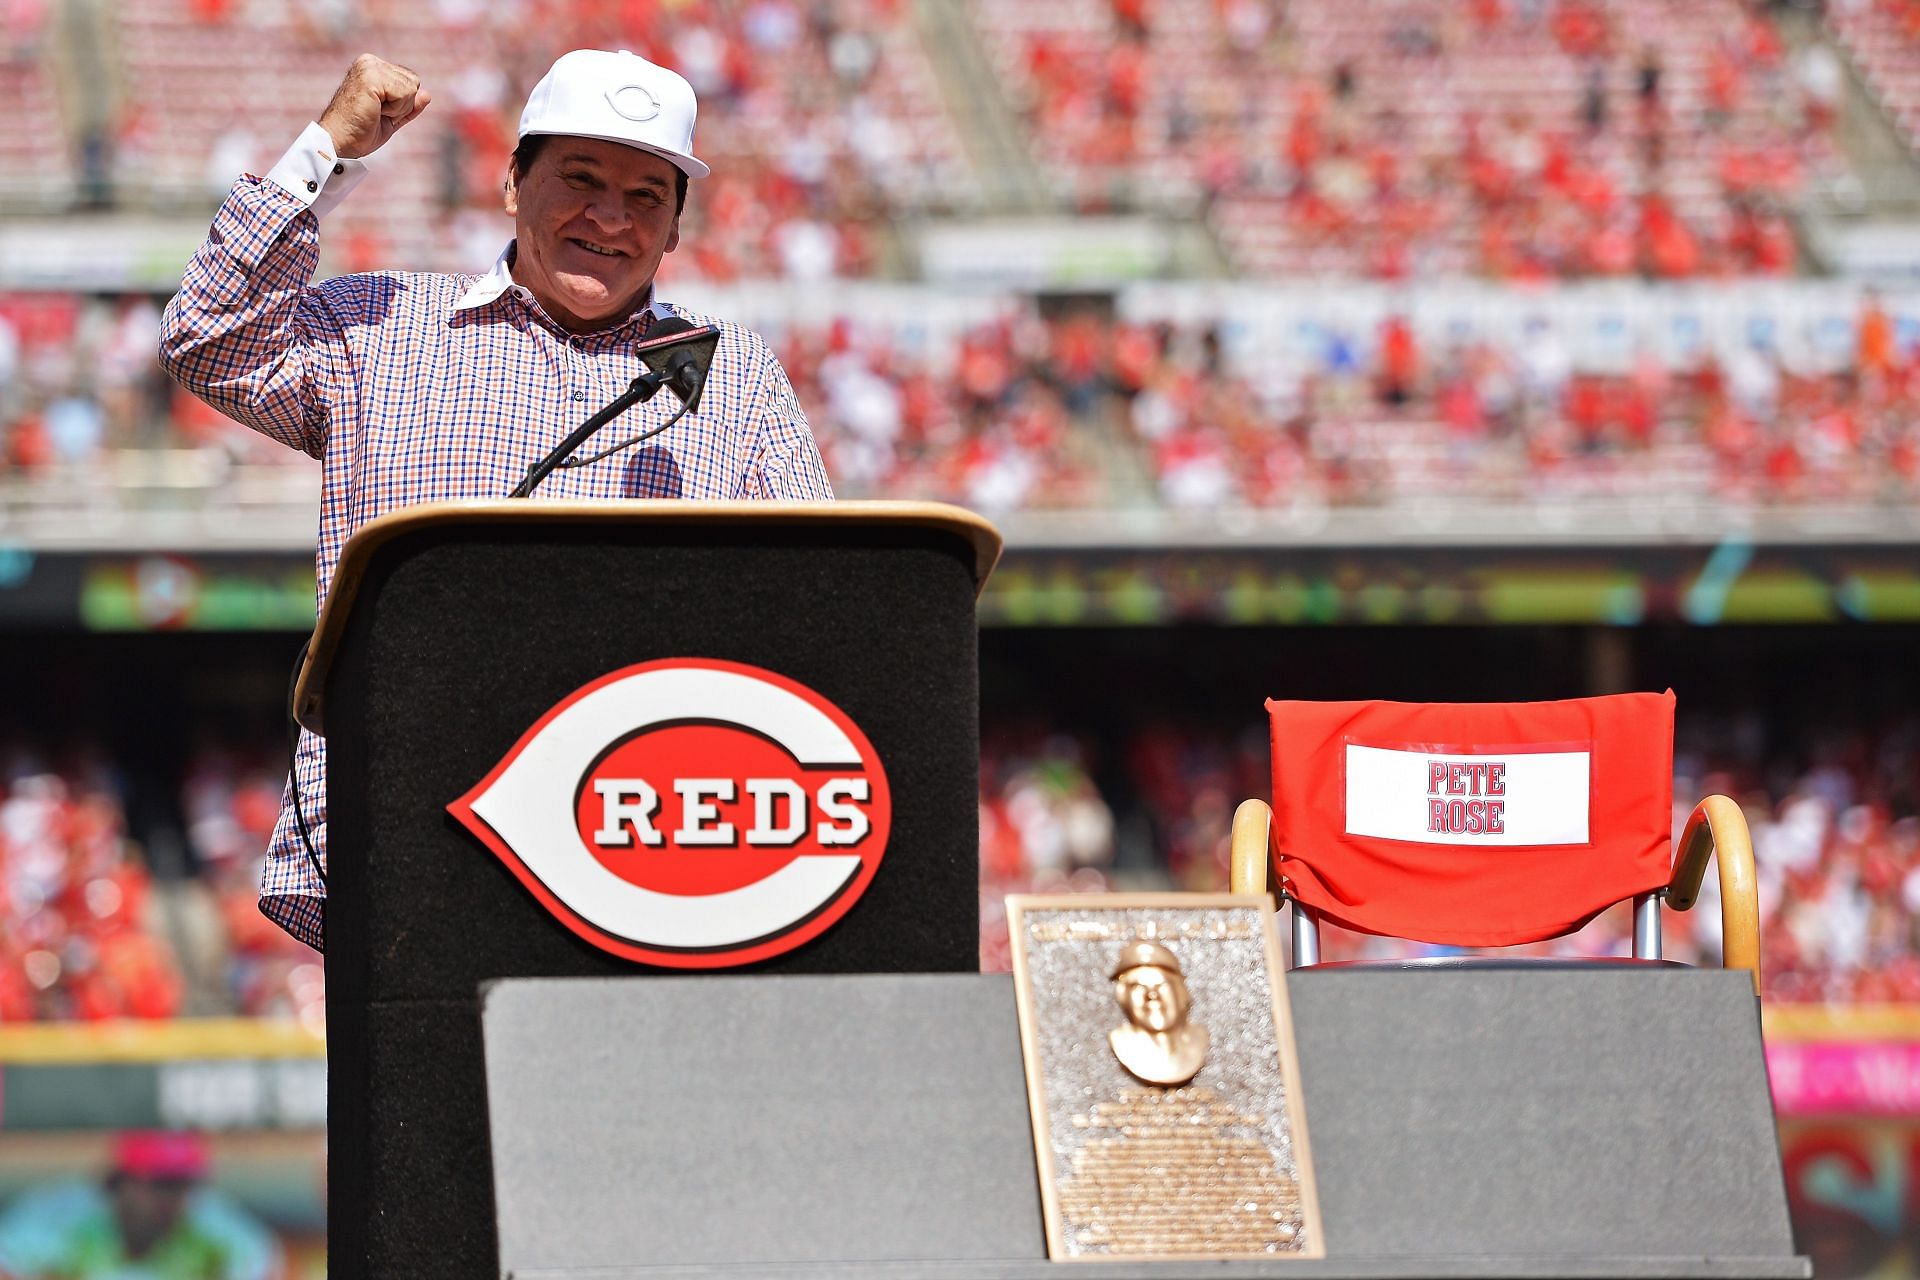 Major League Baseball all-time hits leader Pete Rose speaks during his induction into the Cincinnati Reds Hall of Fame.